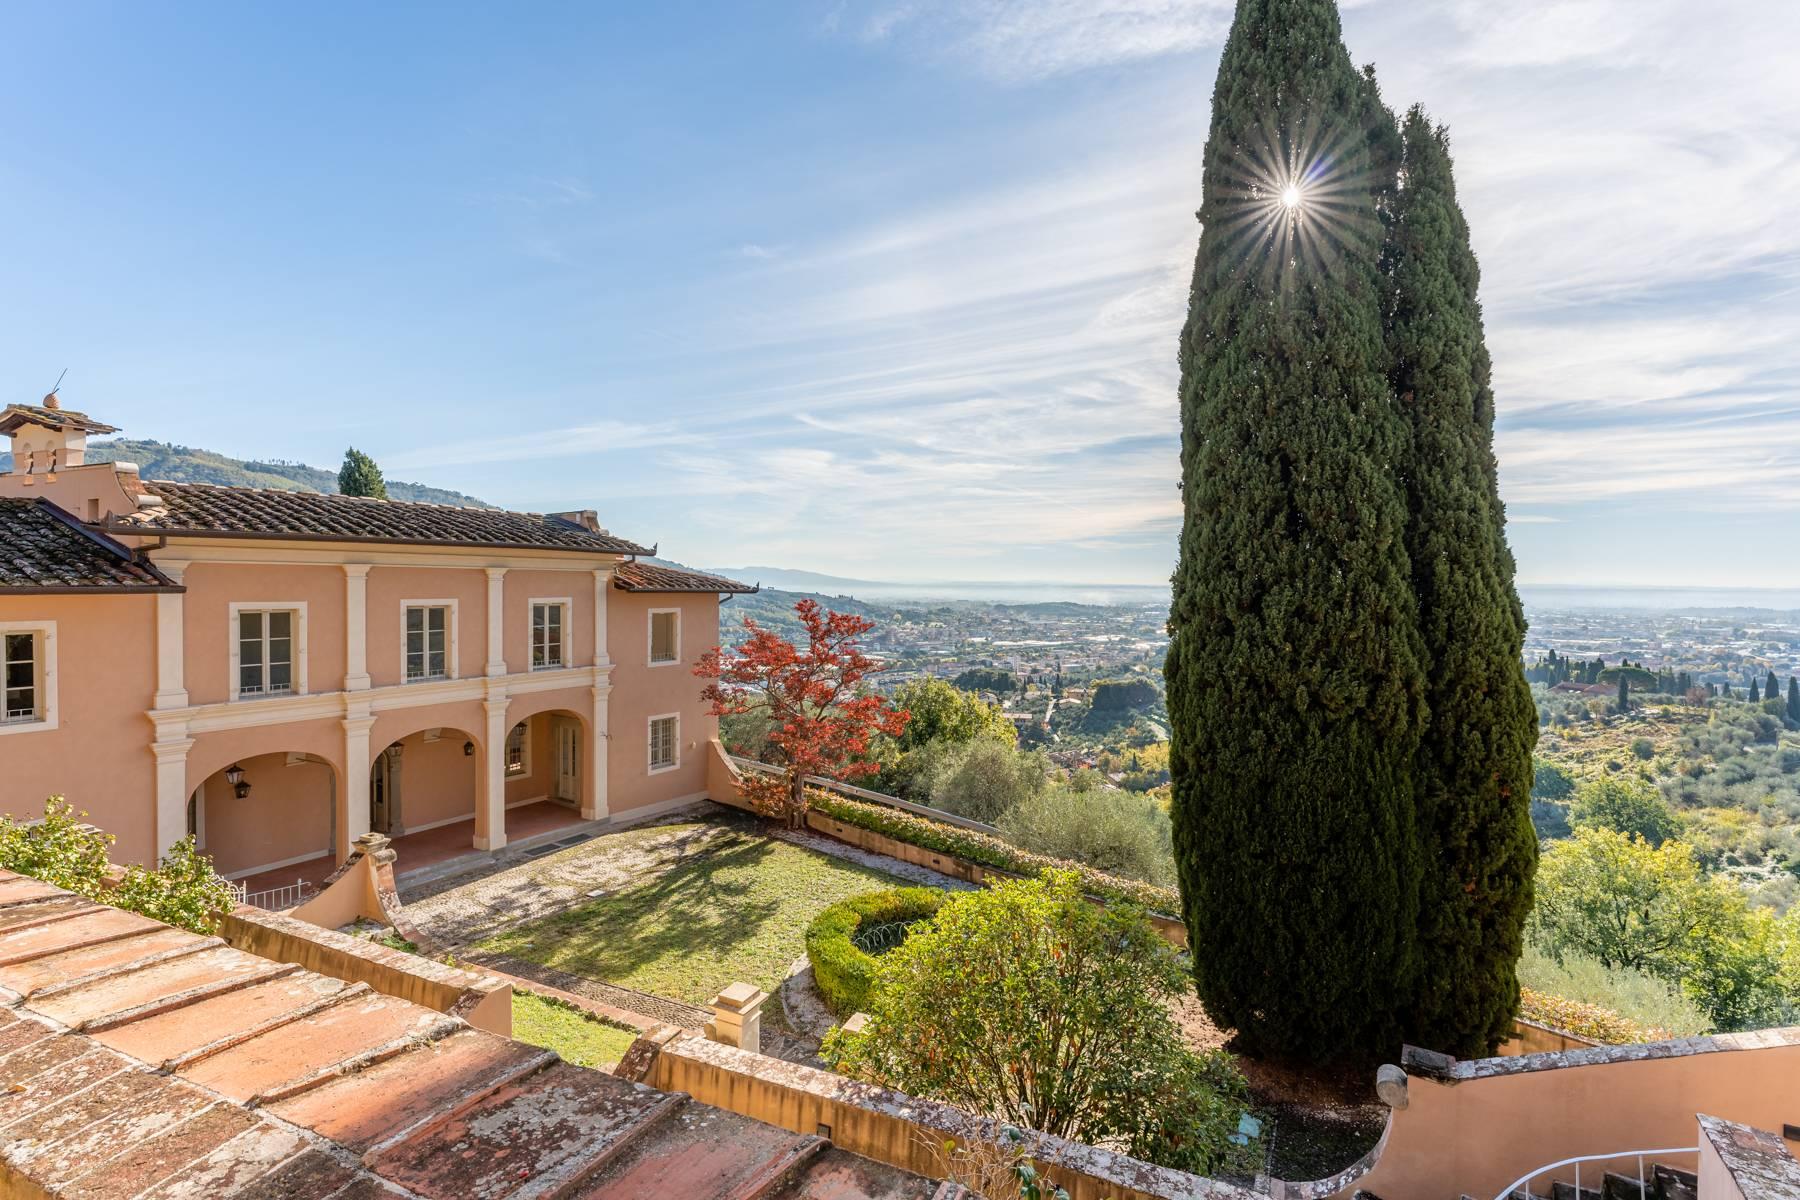 Historic Villa with Chapel on the hills of Pescia - 1